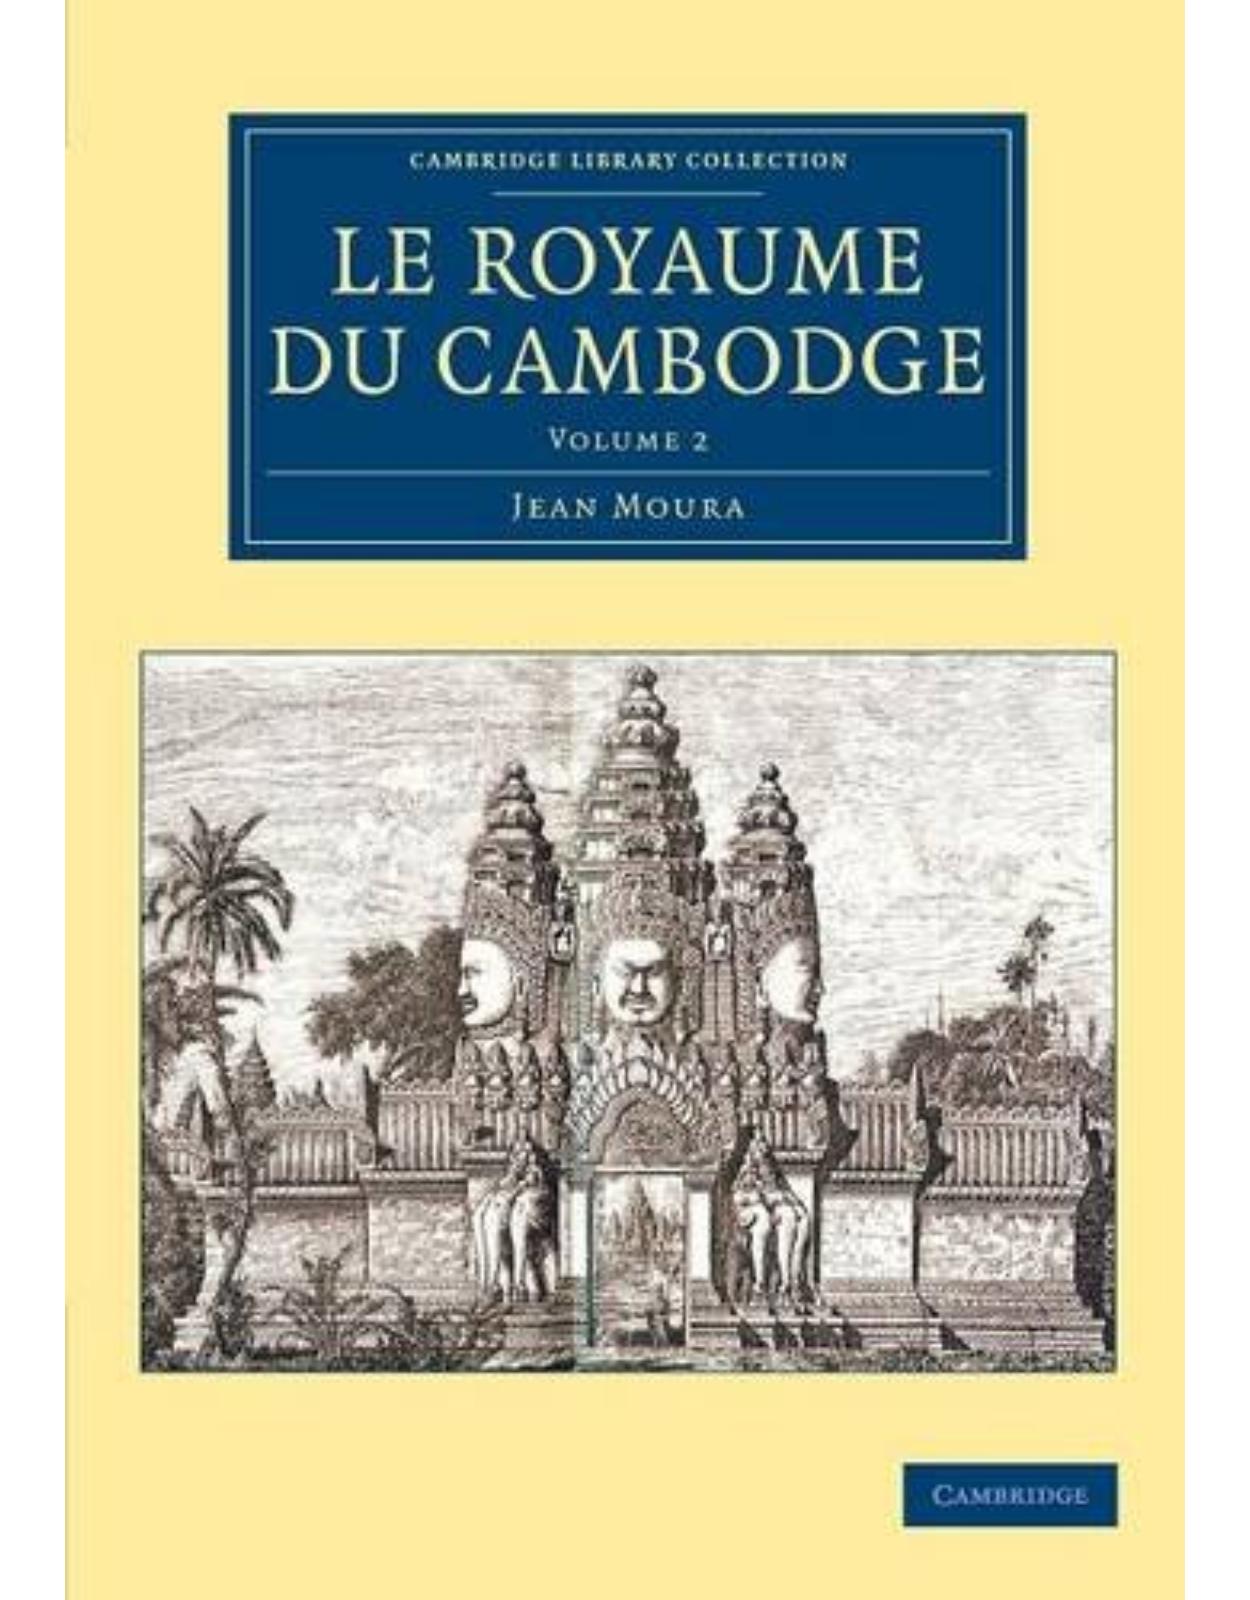 Le Royaume du Cambodge: Volume 2 (Cambridge Library Collection - East and South-East Asian History)